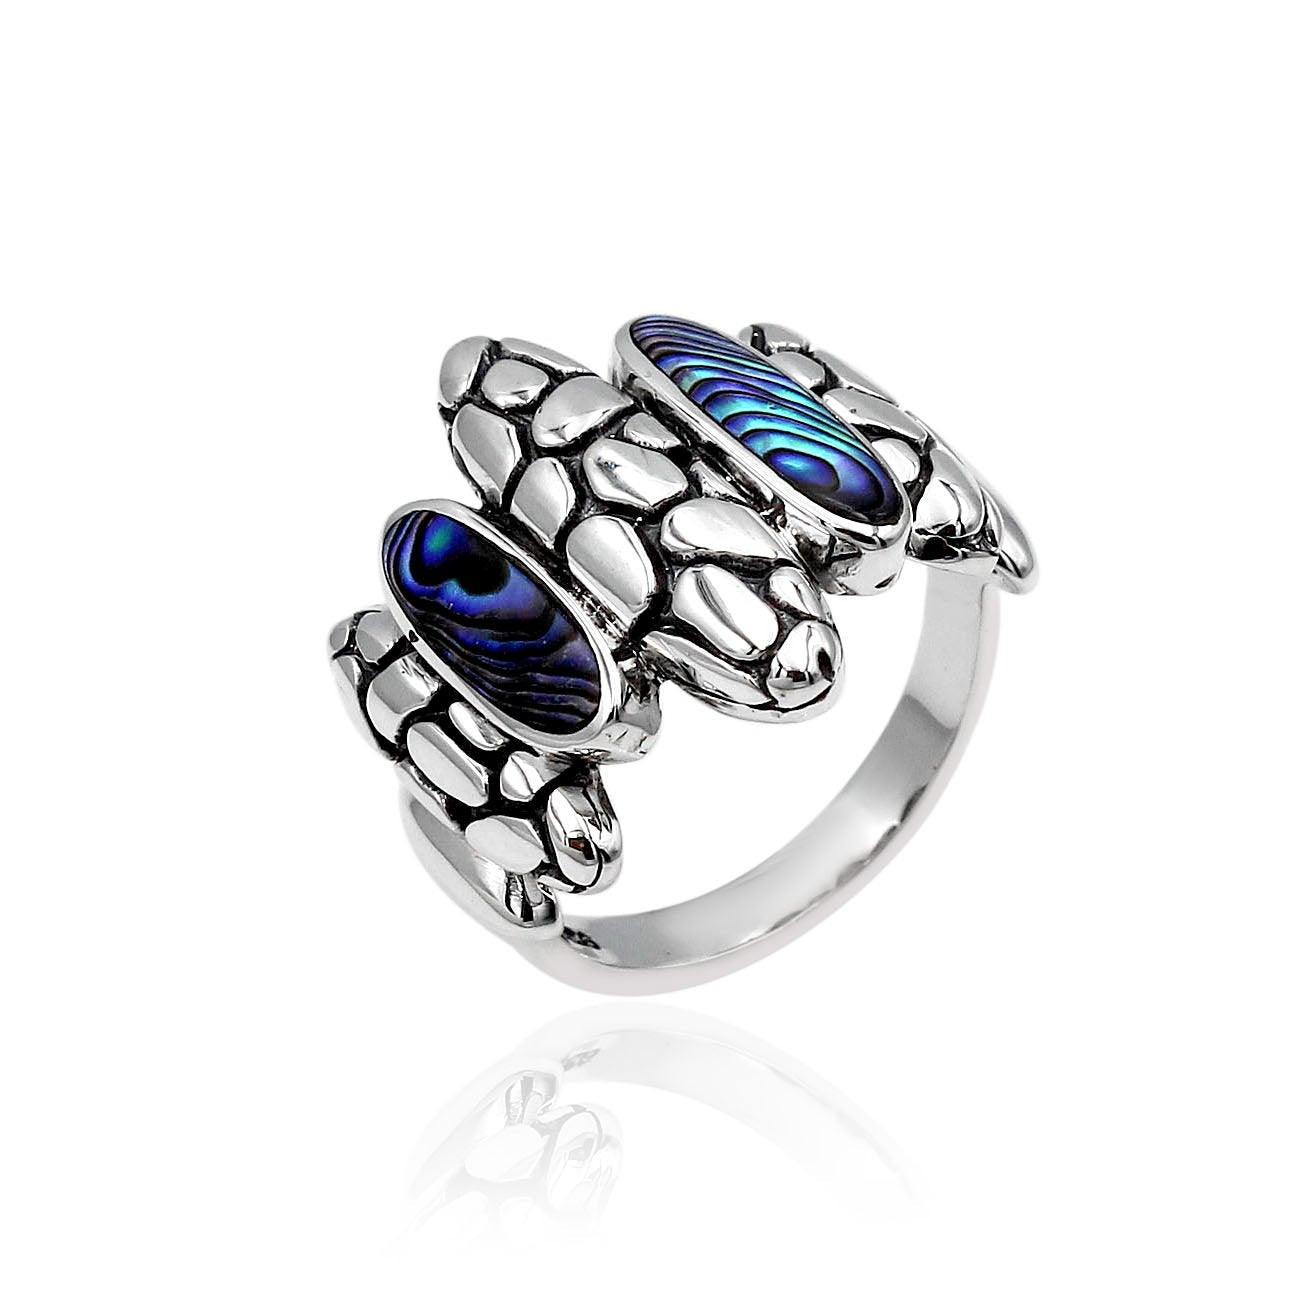 Bali Abalone Shell Inlay Cobblestone Cocktail Ring in 925 Sterling Silver - Size L , M , N , O , P , Q - Inspiring Jewellery